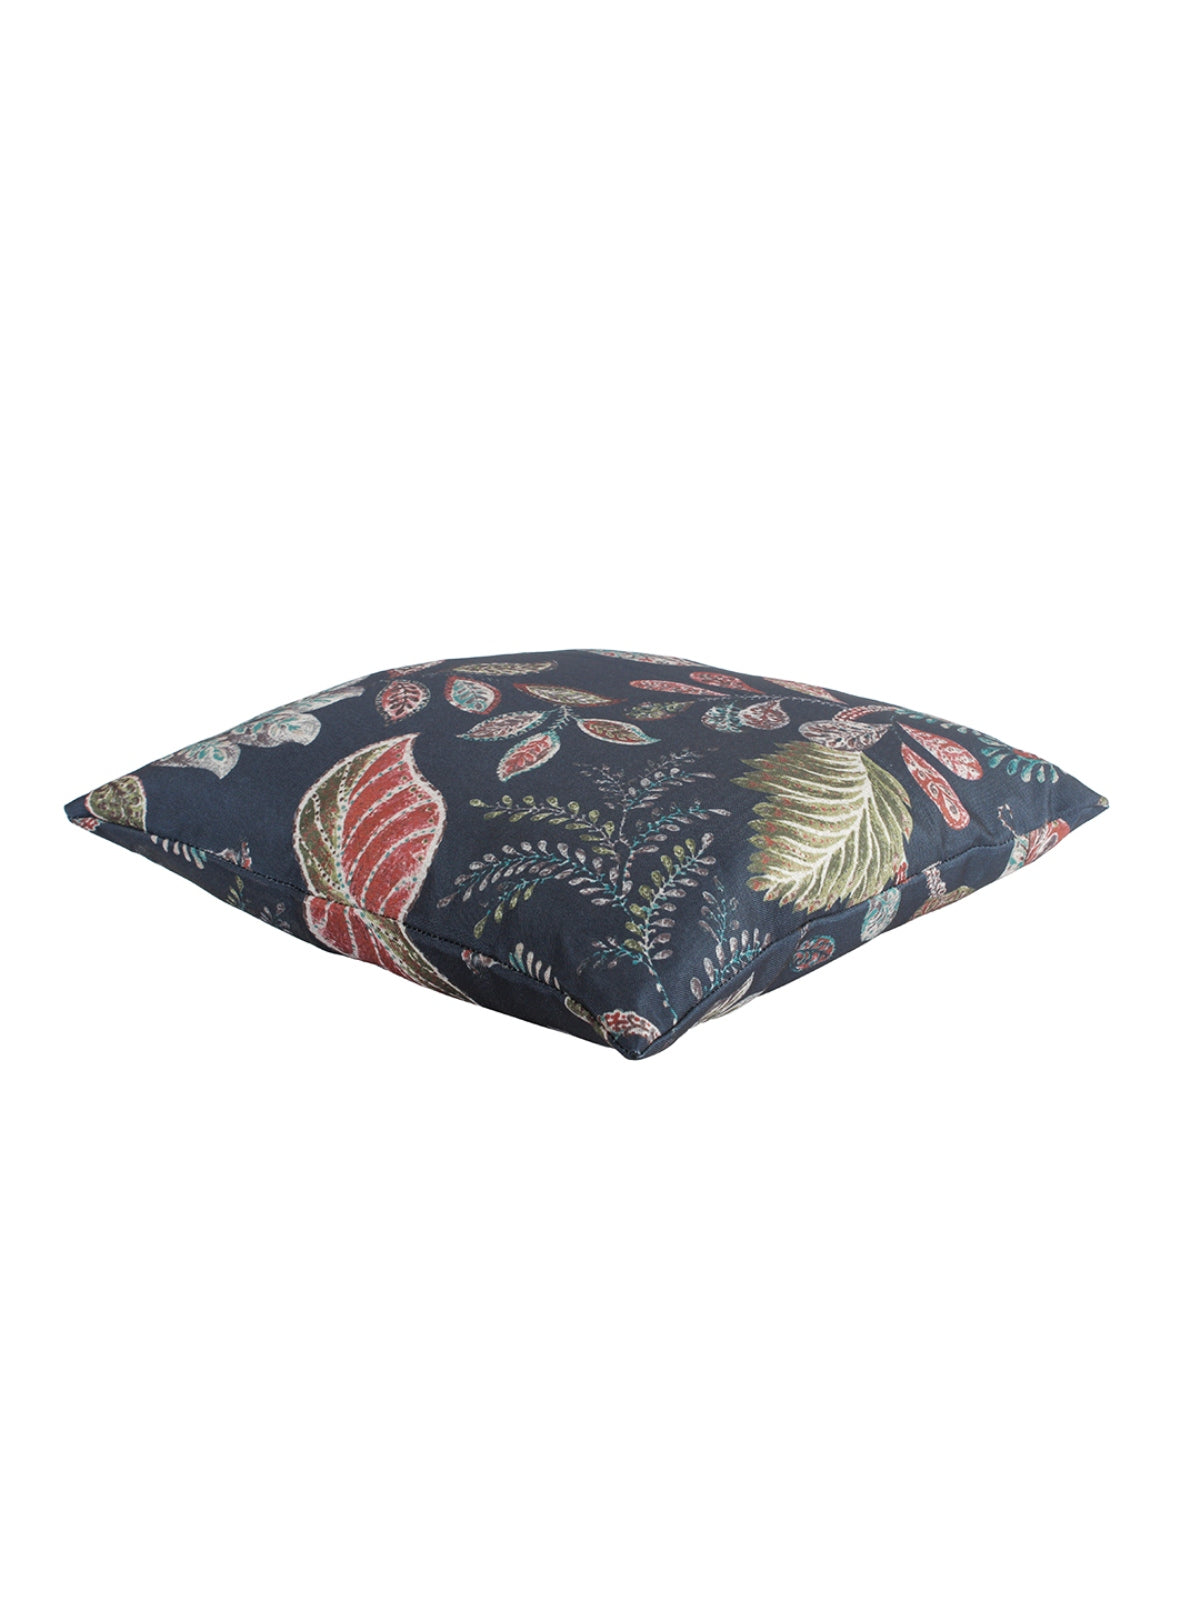 Floral Polyester Cushion Cover 16x16 Inch, Set of 5 - Navy Blue